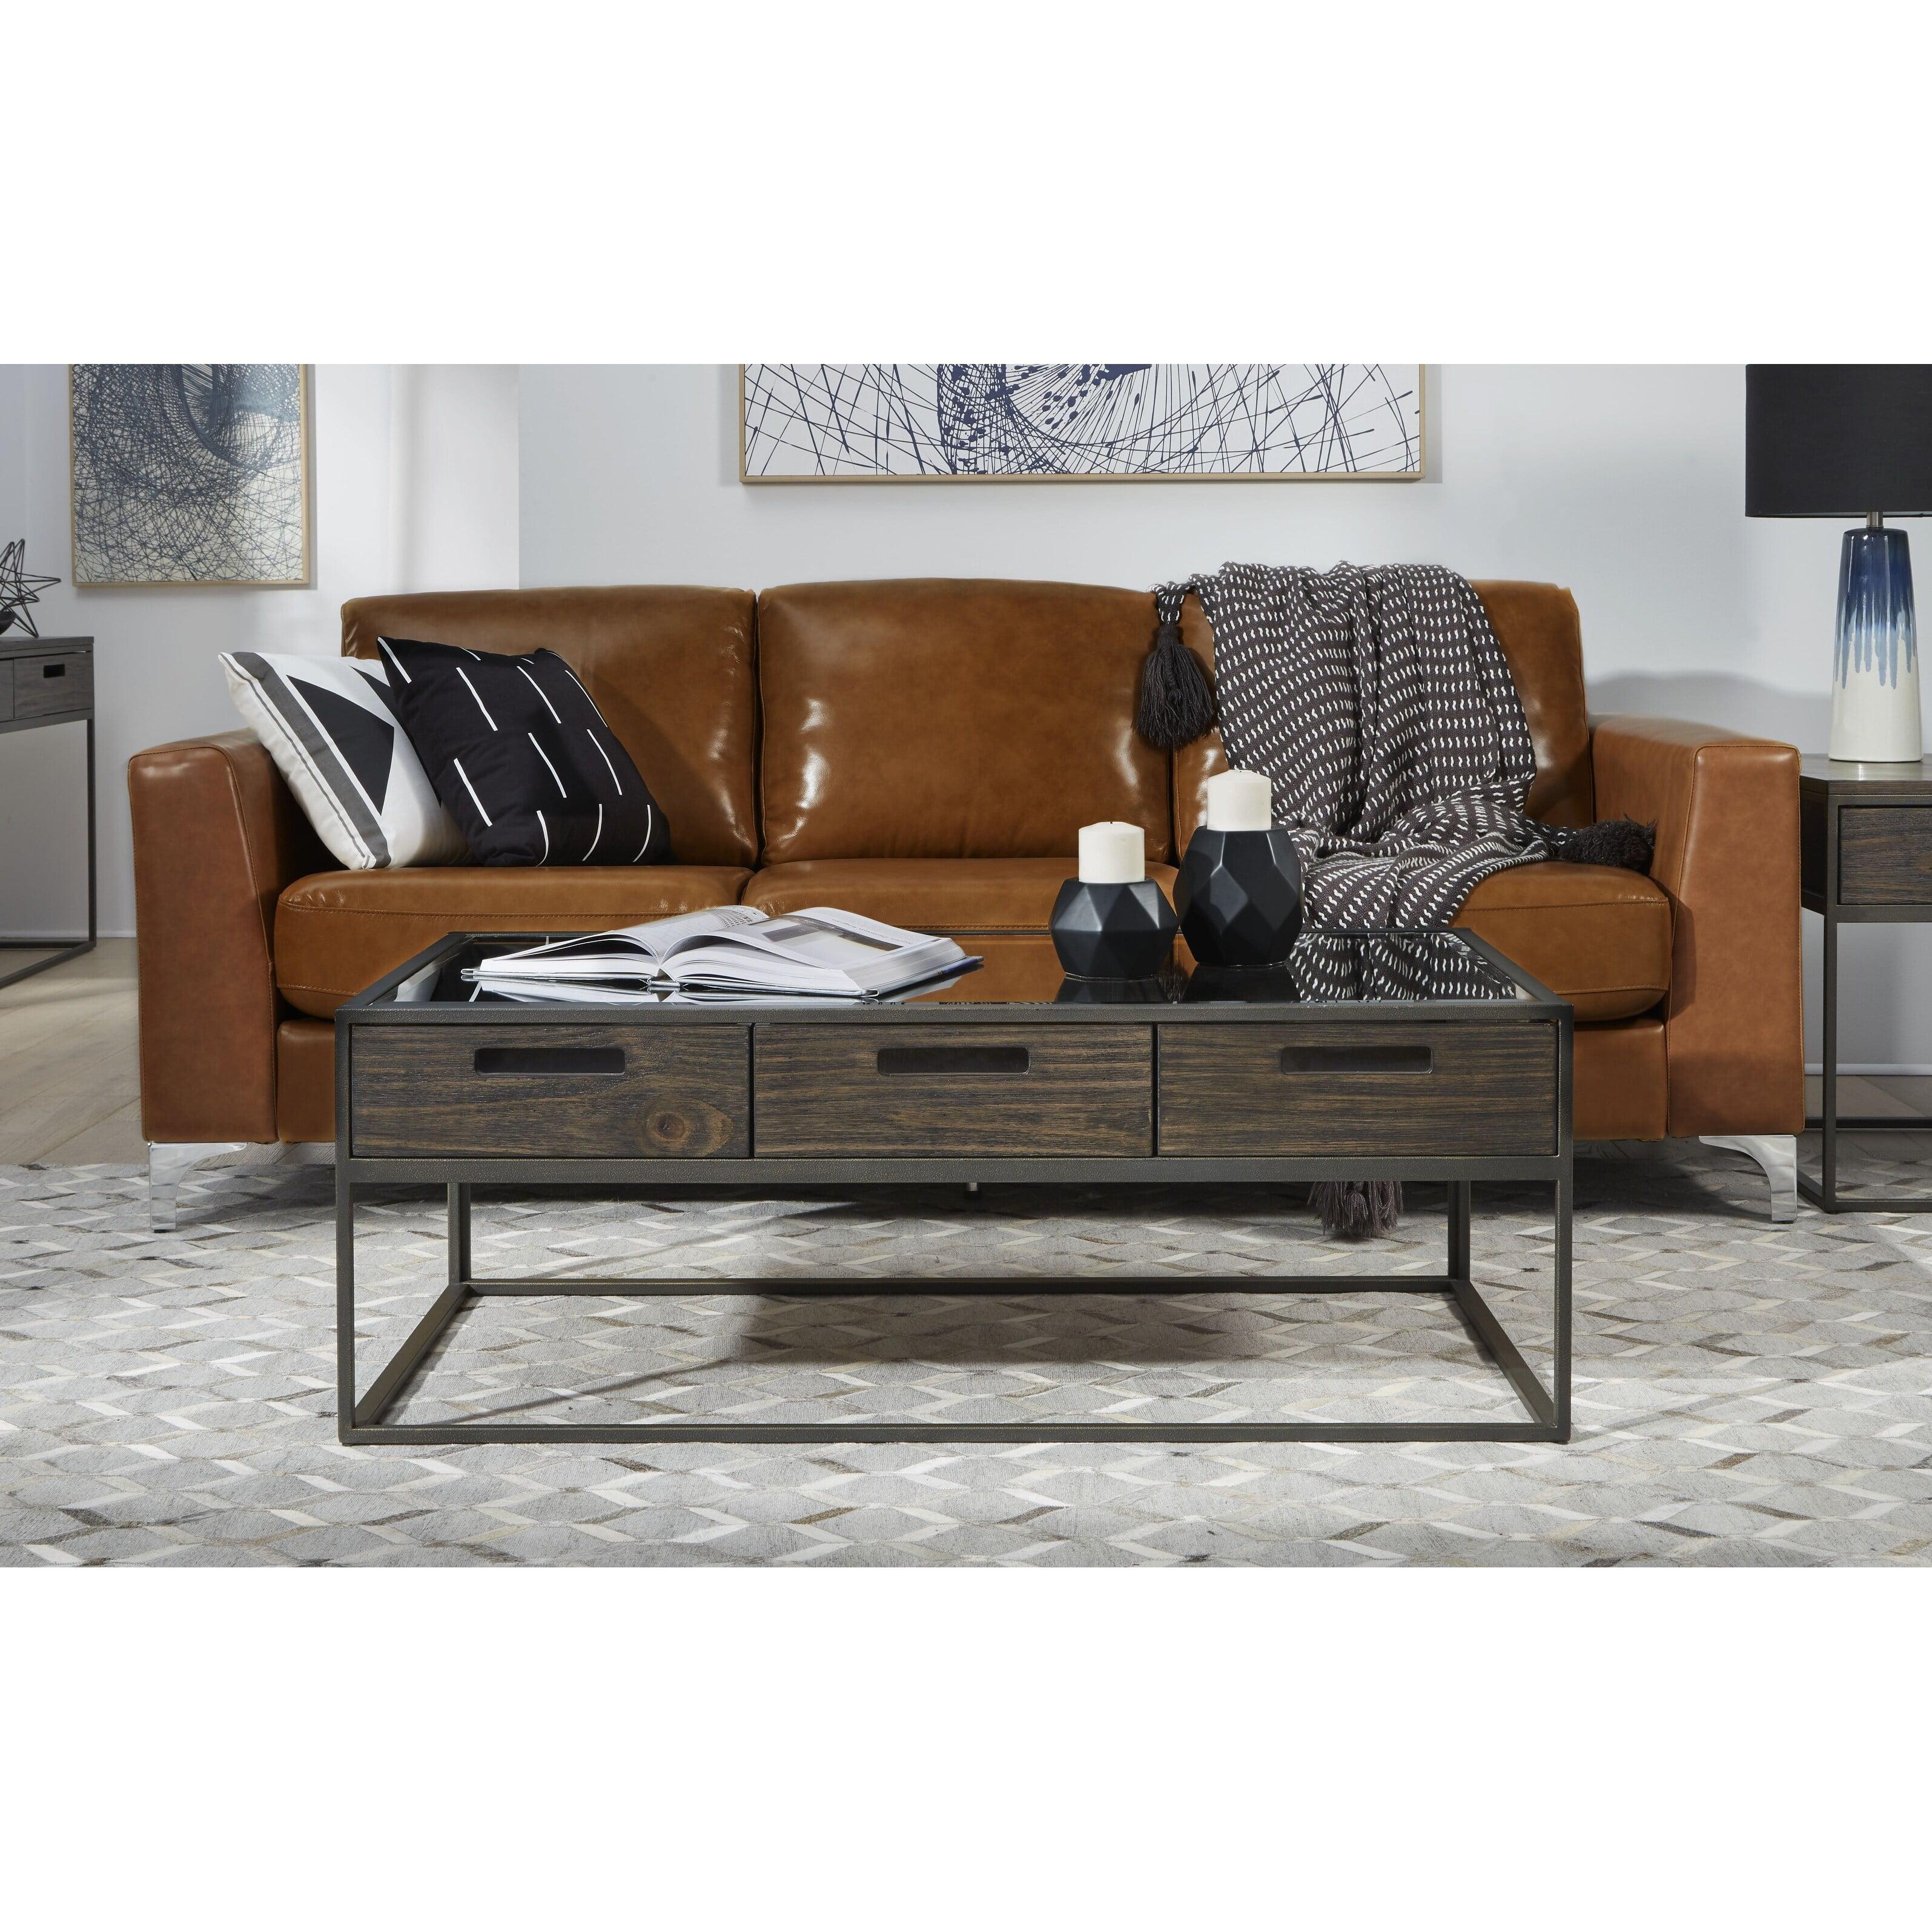 Bradley Rustic Modern Pine and Glass Coffee Table with Storage